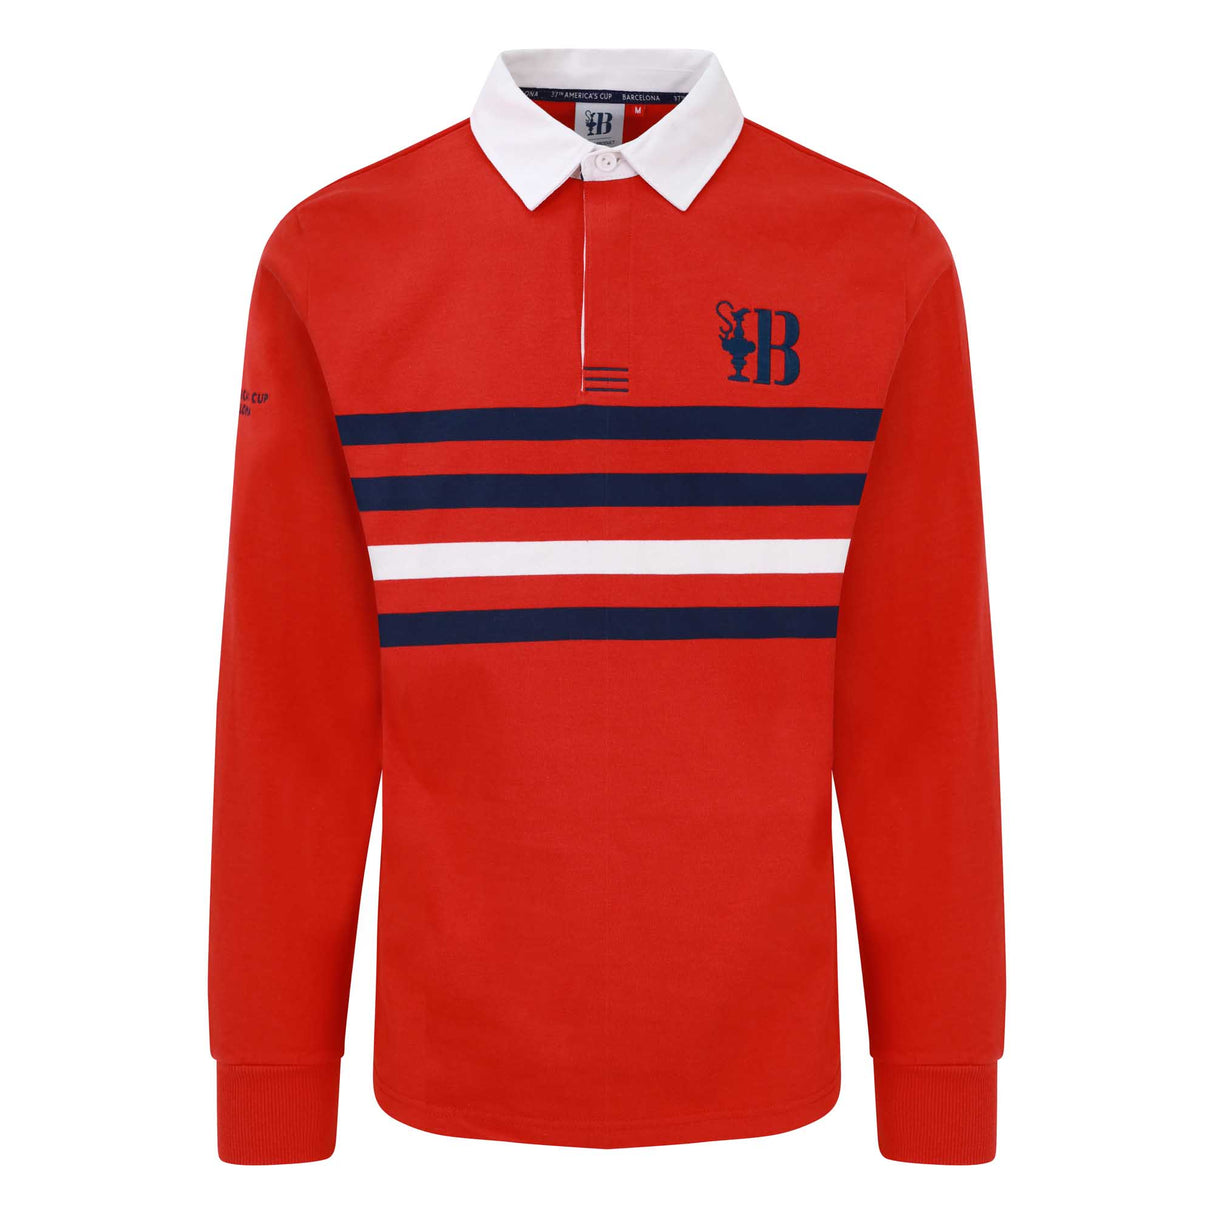 37th America's Cup Striped Sailing Jersey – 37th Americas Cup Store